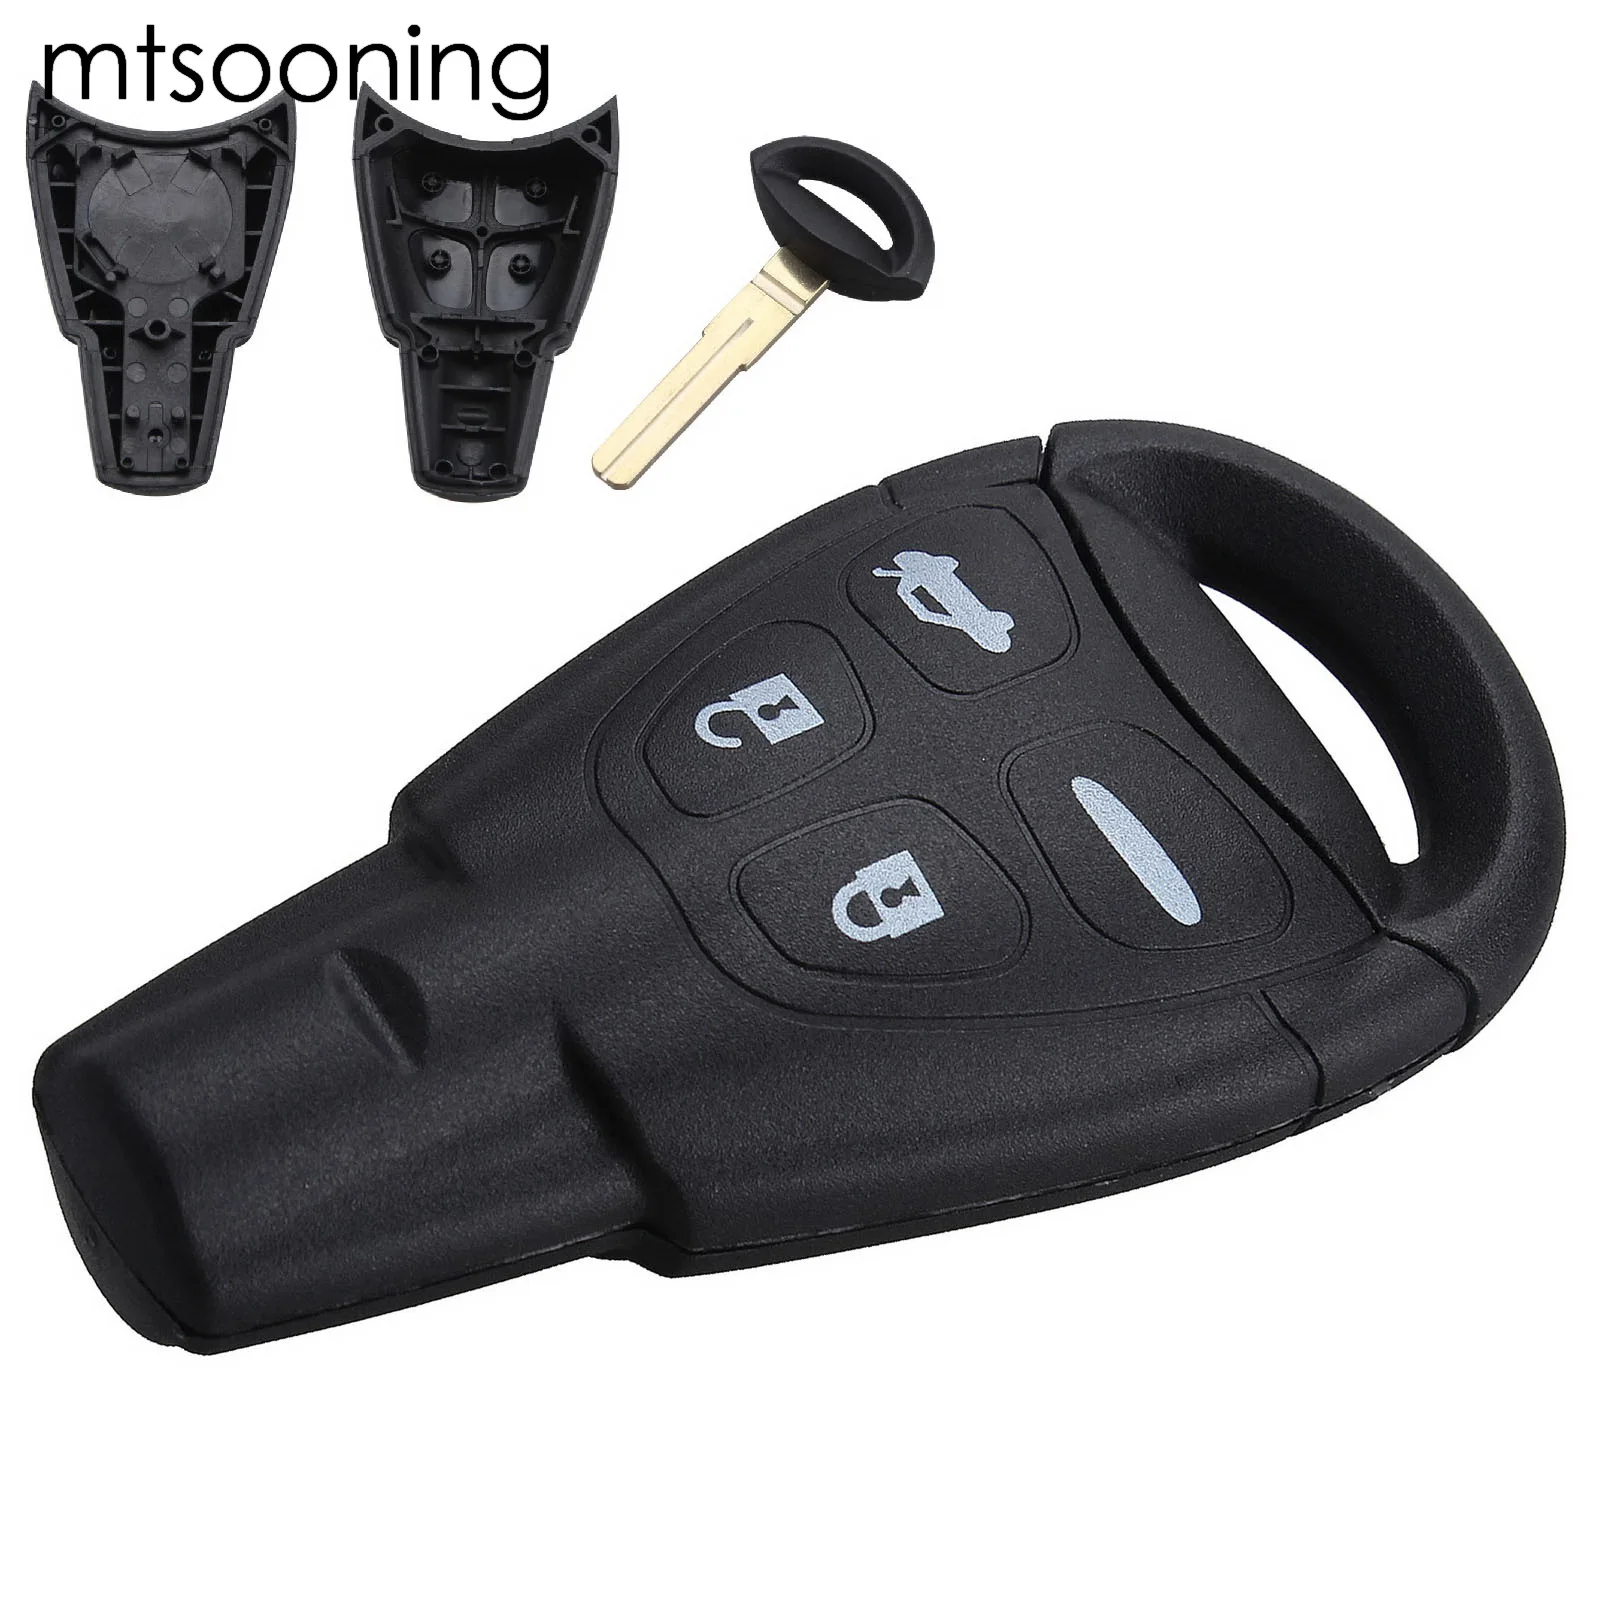 mtsooning Remote Key Shell Fob Blank Blade 4 Button Replacement For 2003-2007 Saab 9-3 Sport Sedan Convertible Sport Combi Wagon